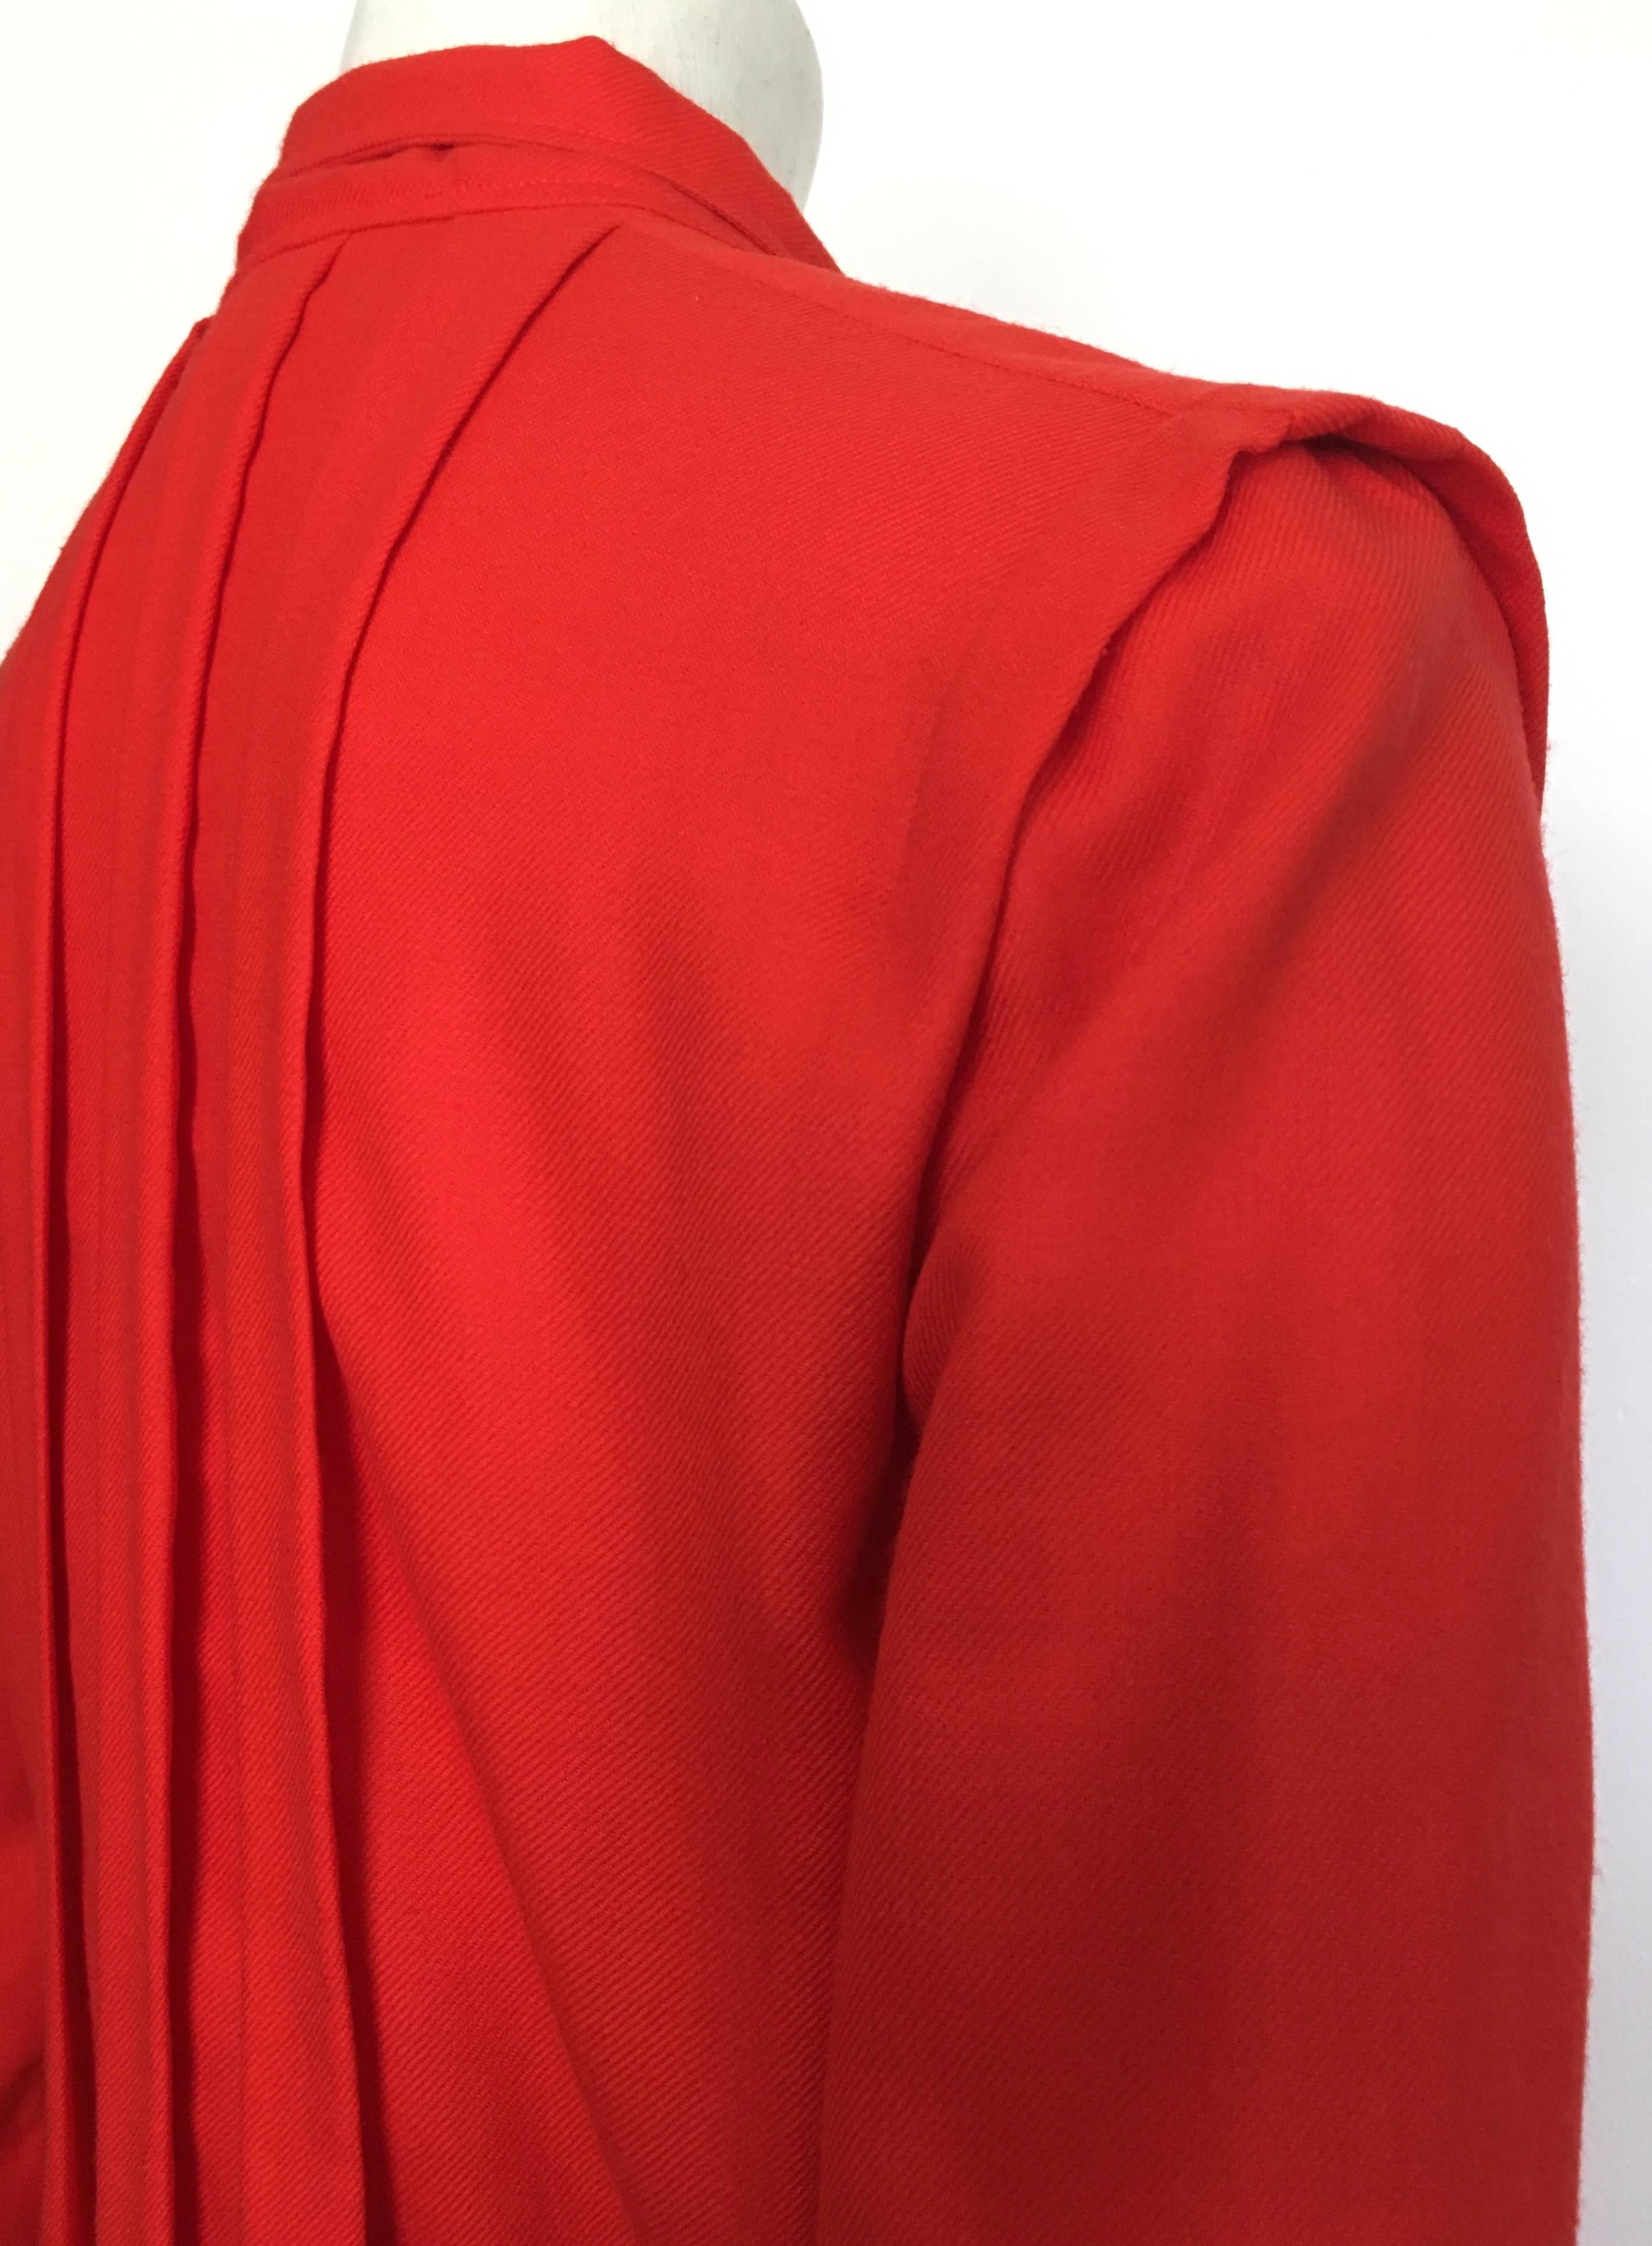 Courreges Red Wool Long Sleeve Dress with Pockets, 1980s  For Sale 2